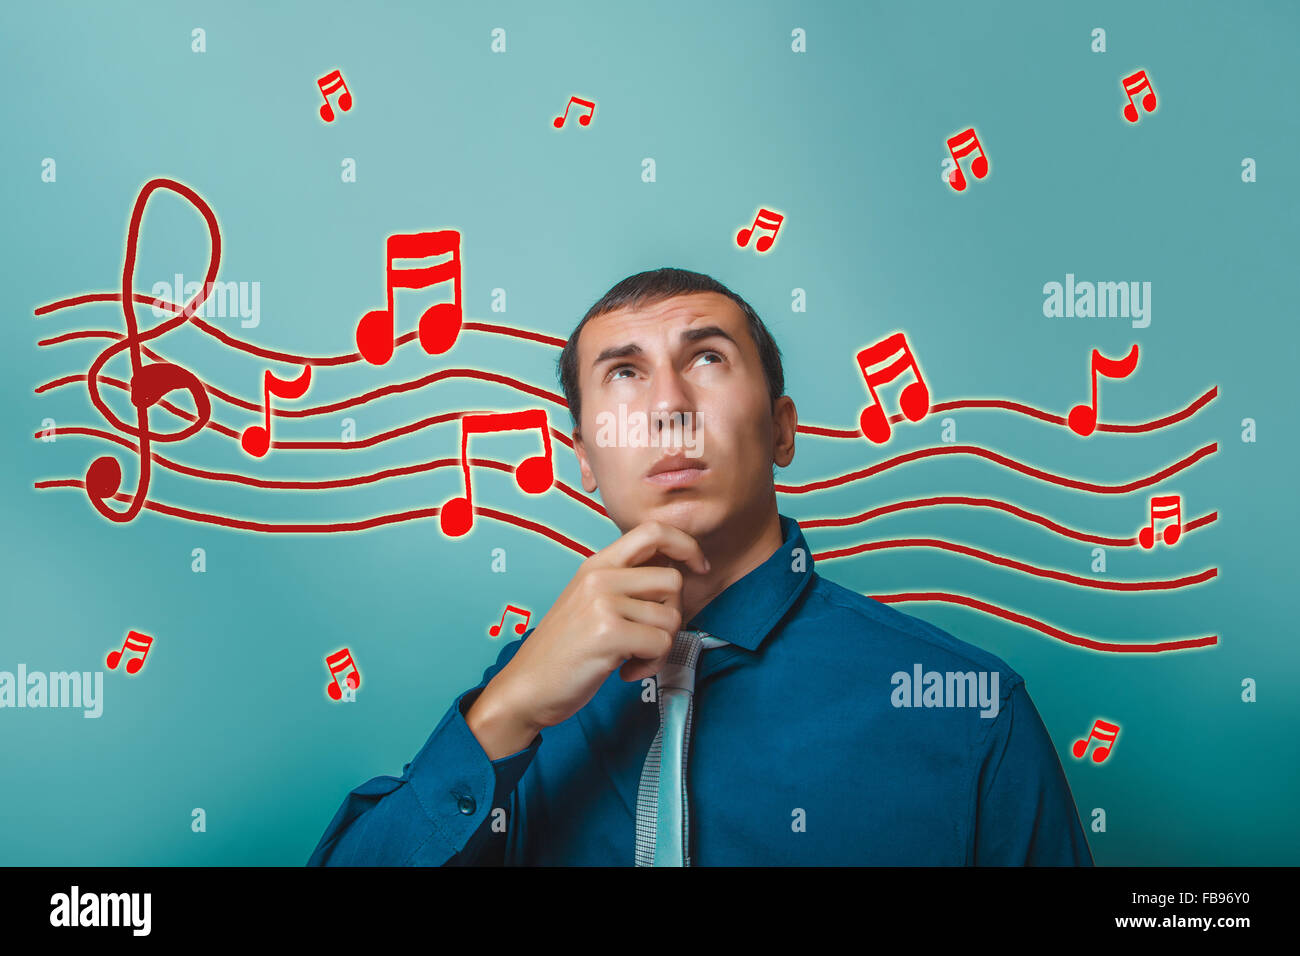 a male looking up thinking music notes sketch prevent sound Stock Photo